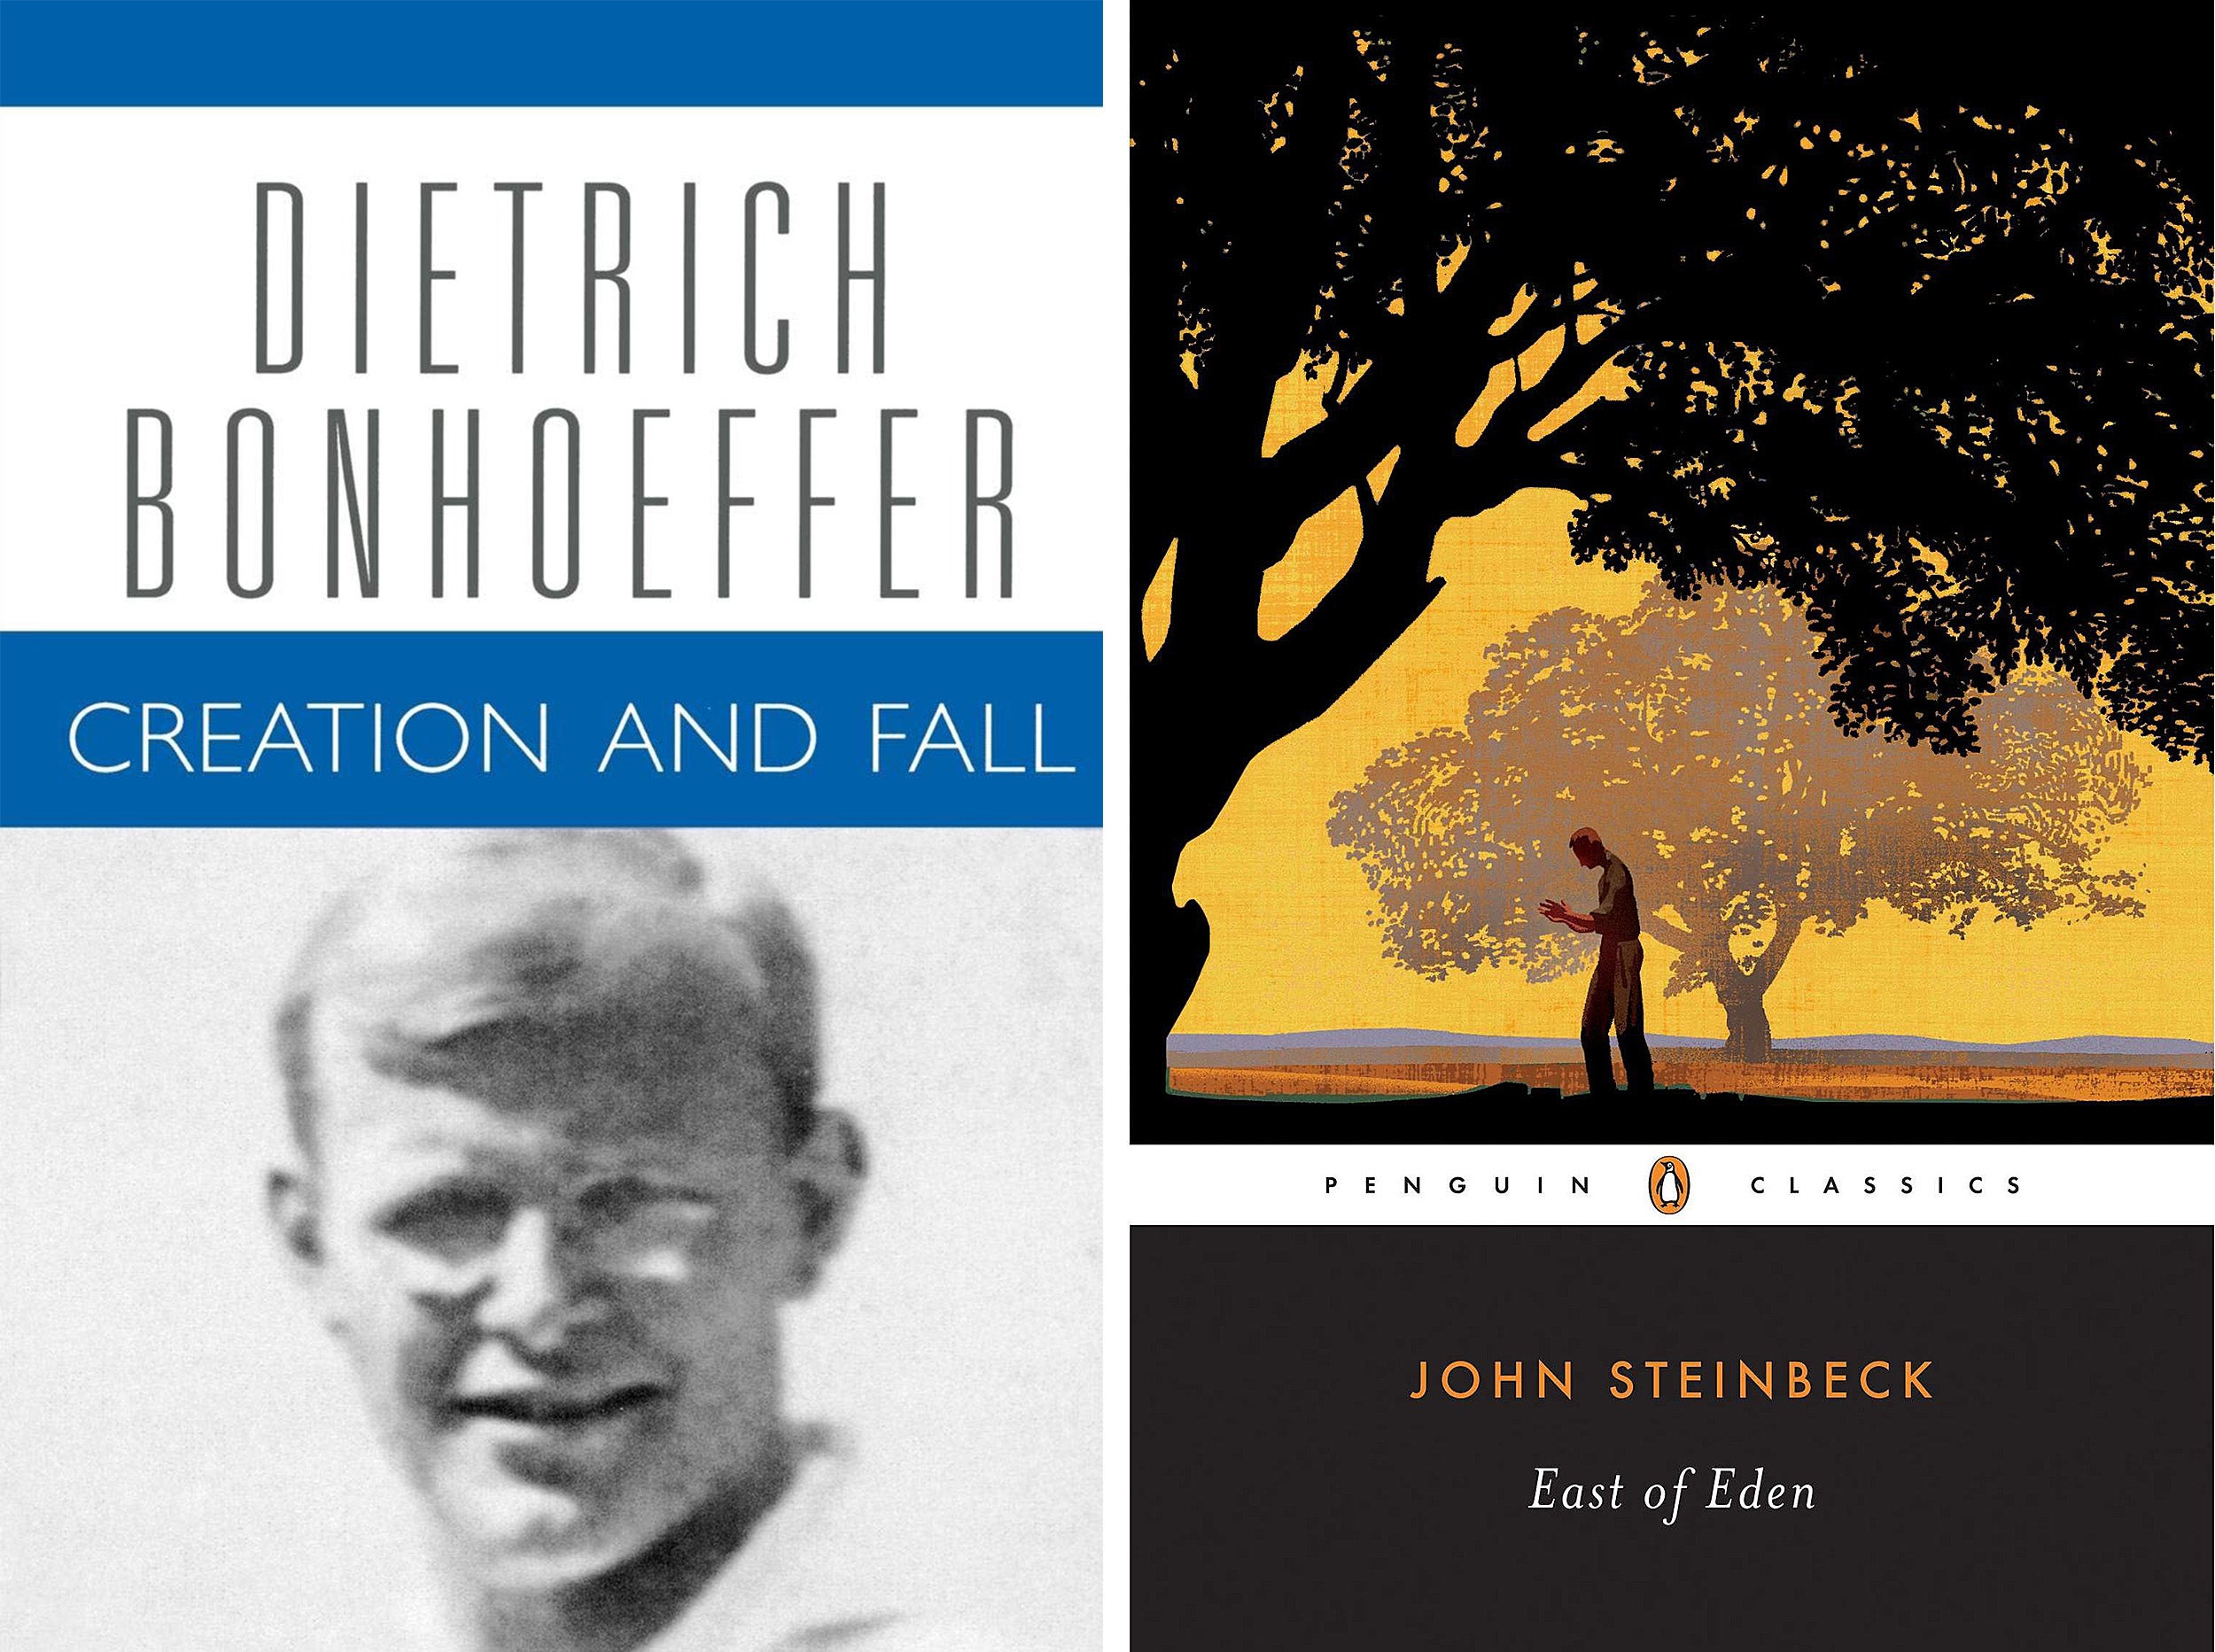 Creation and Fall and East of Eden book covers